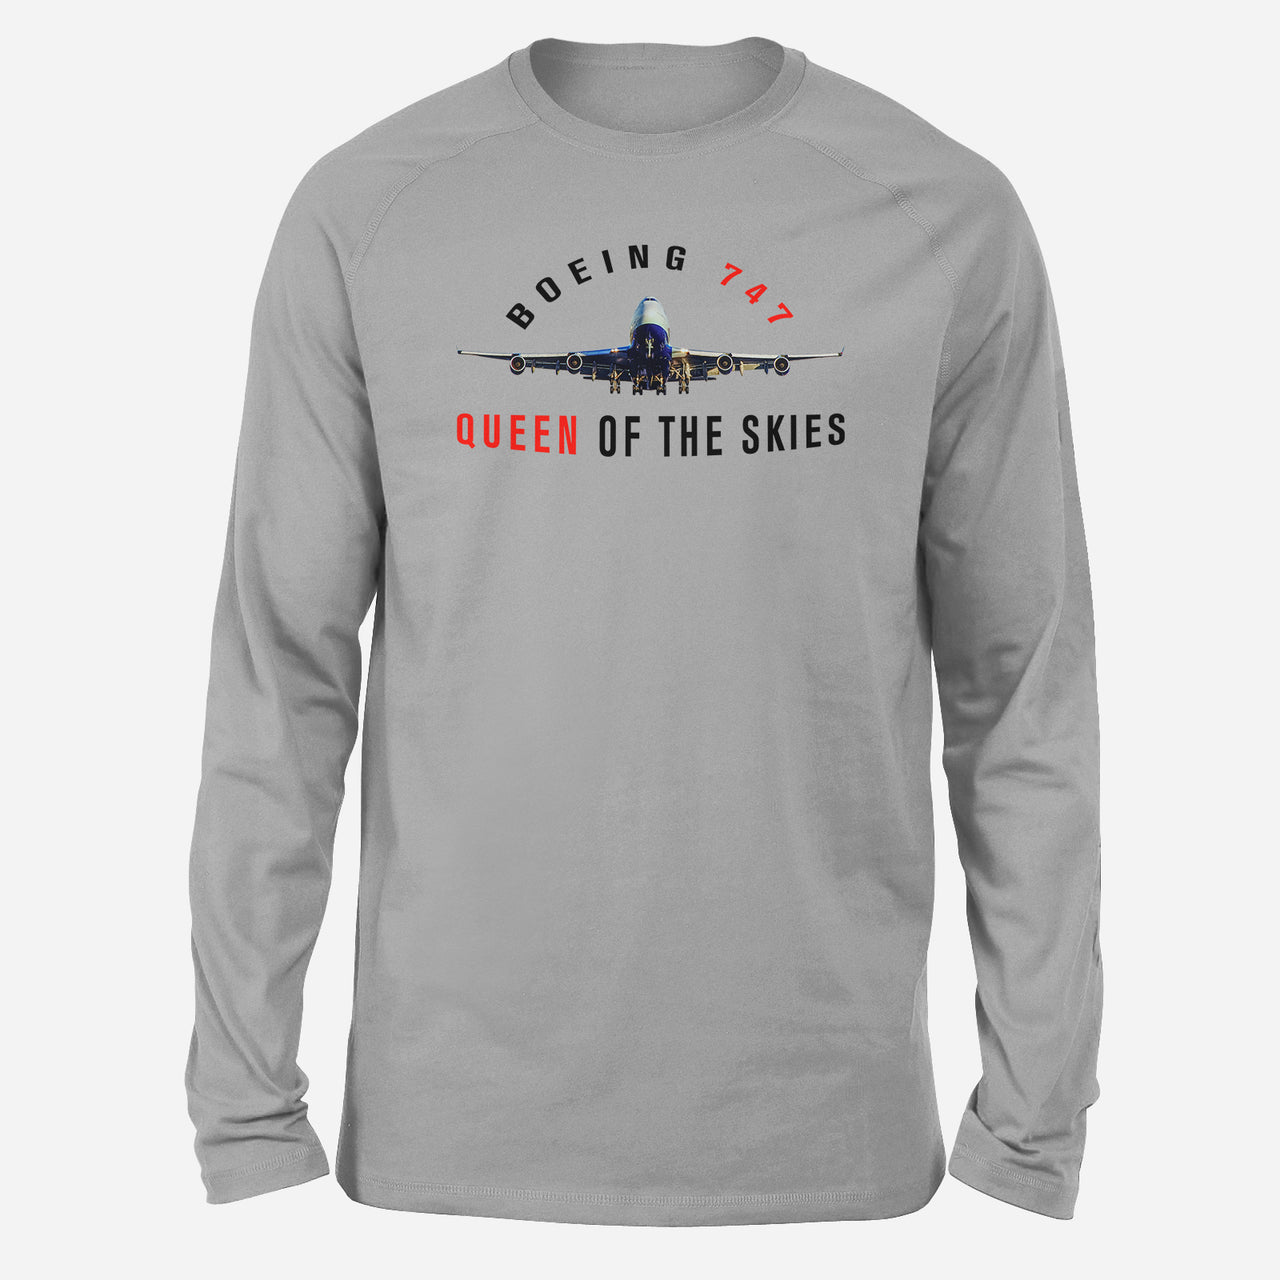 Boeing 747 Queen of the Skies Designed Long-Sleeve T-Shirts